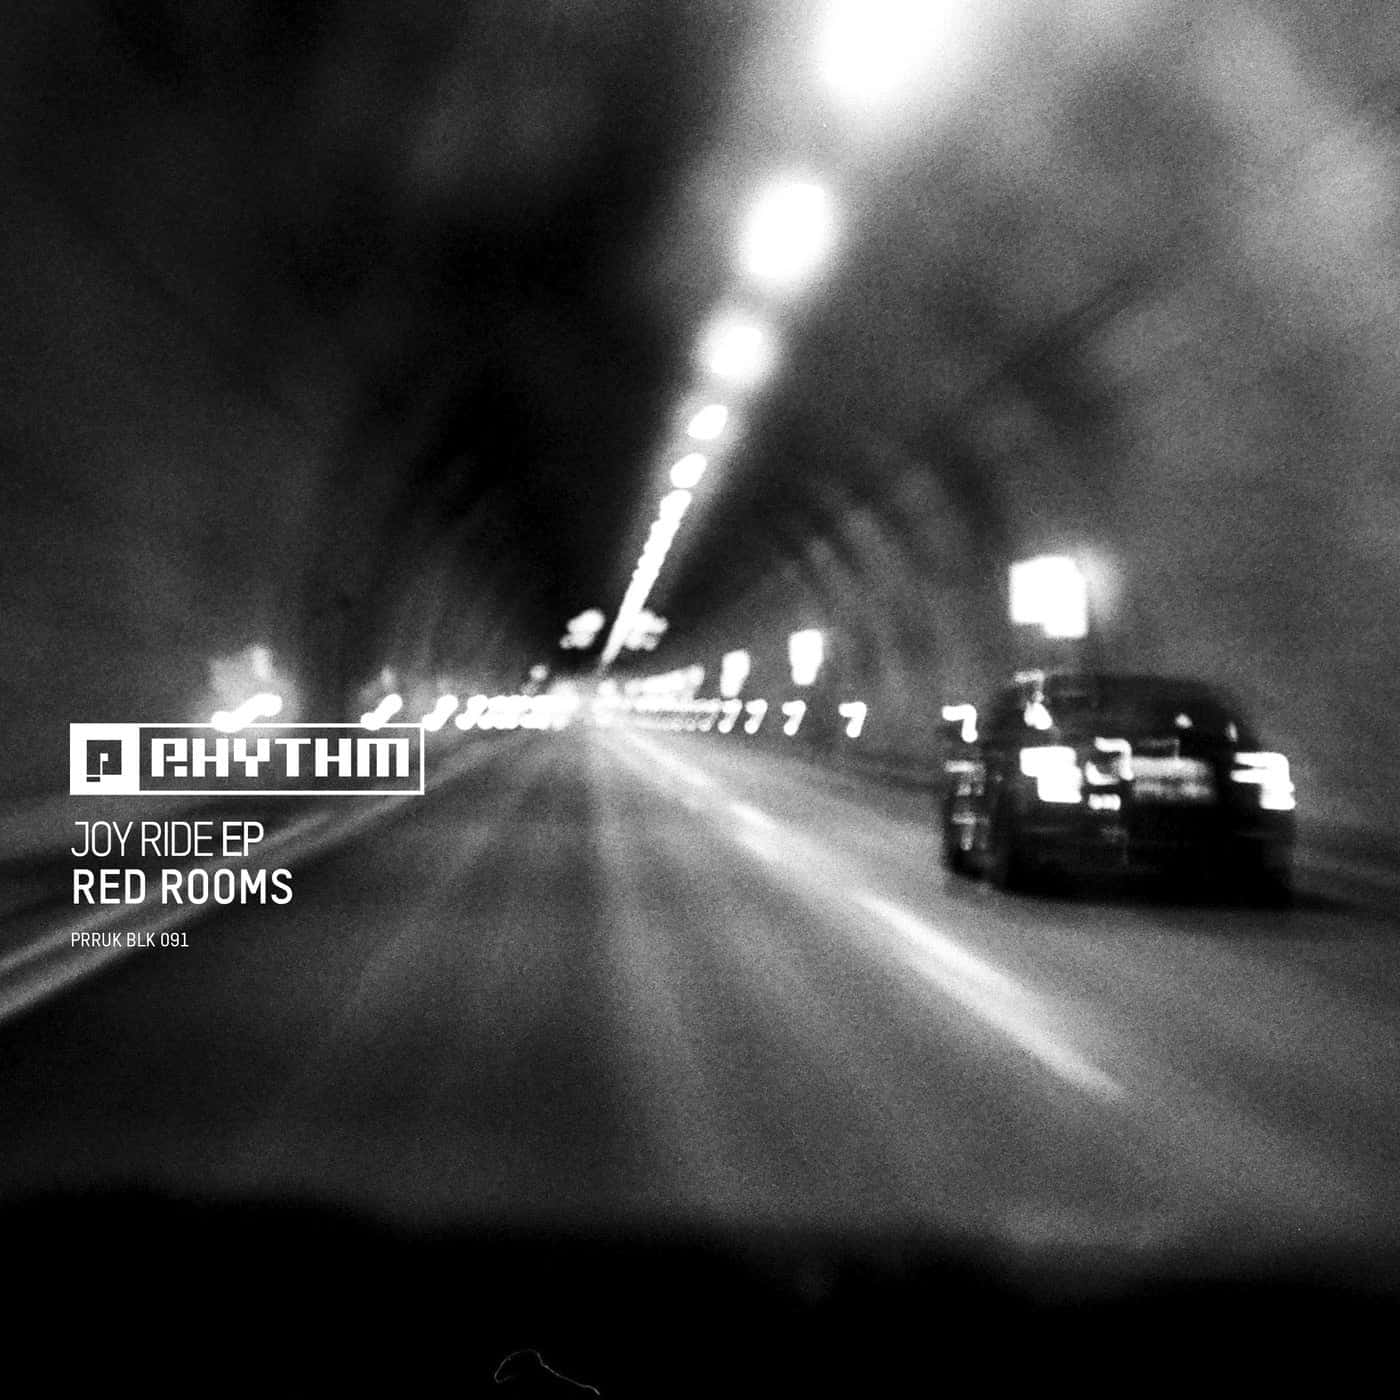 image cover: Joy Ride EP by Red Rooms on Planet Rhythm